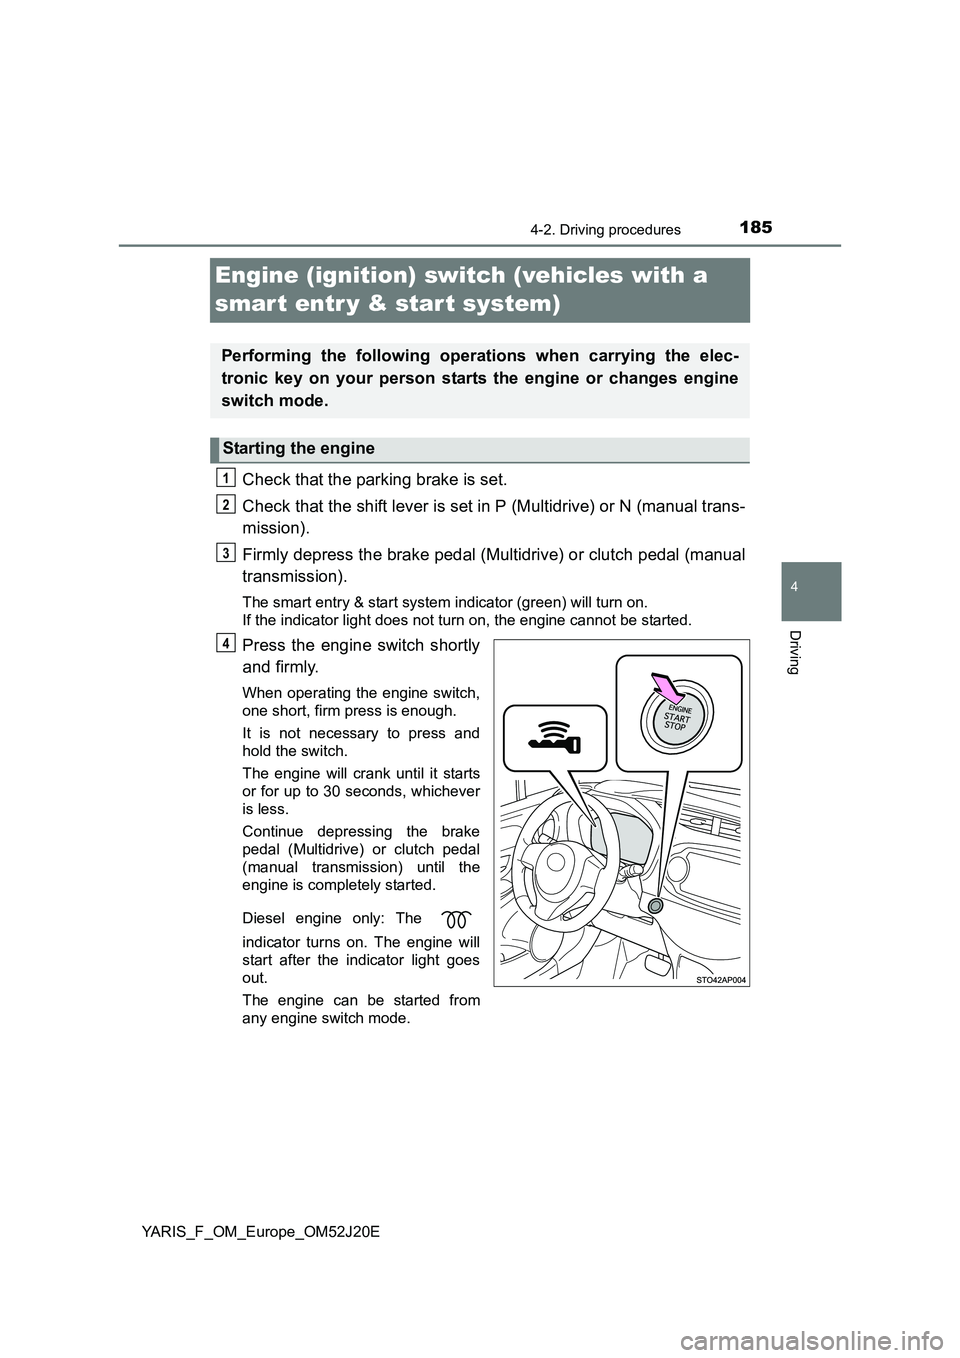 TOYOTA YARIS 2017  Owners Manual 185
4
4-2. Driving procedures
Driving
YARIS_F_OM_Europe_OM52J20E
Engine (ignition) switch (vehicles with a  
smar t entr y & start system)
Check that the parking brake is set. 
Check that the shift le